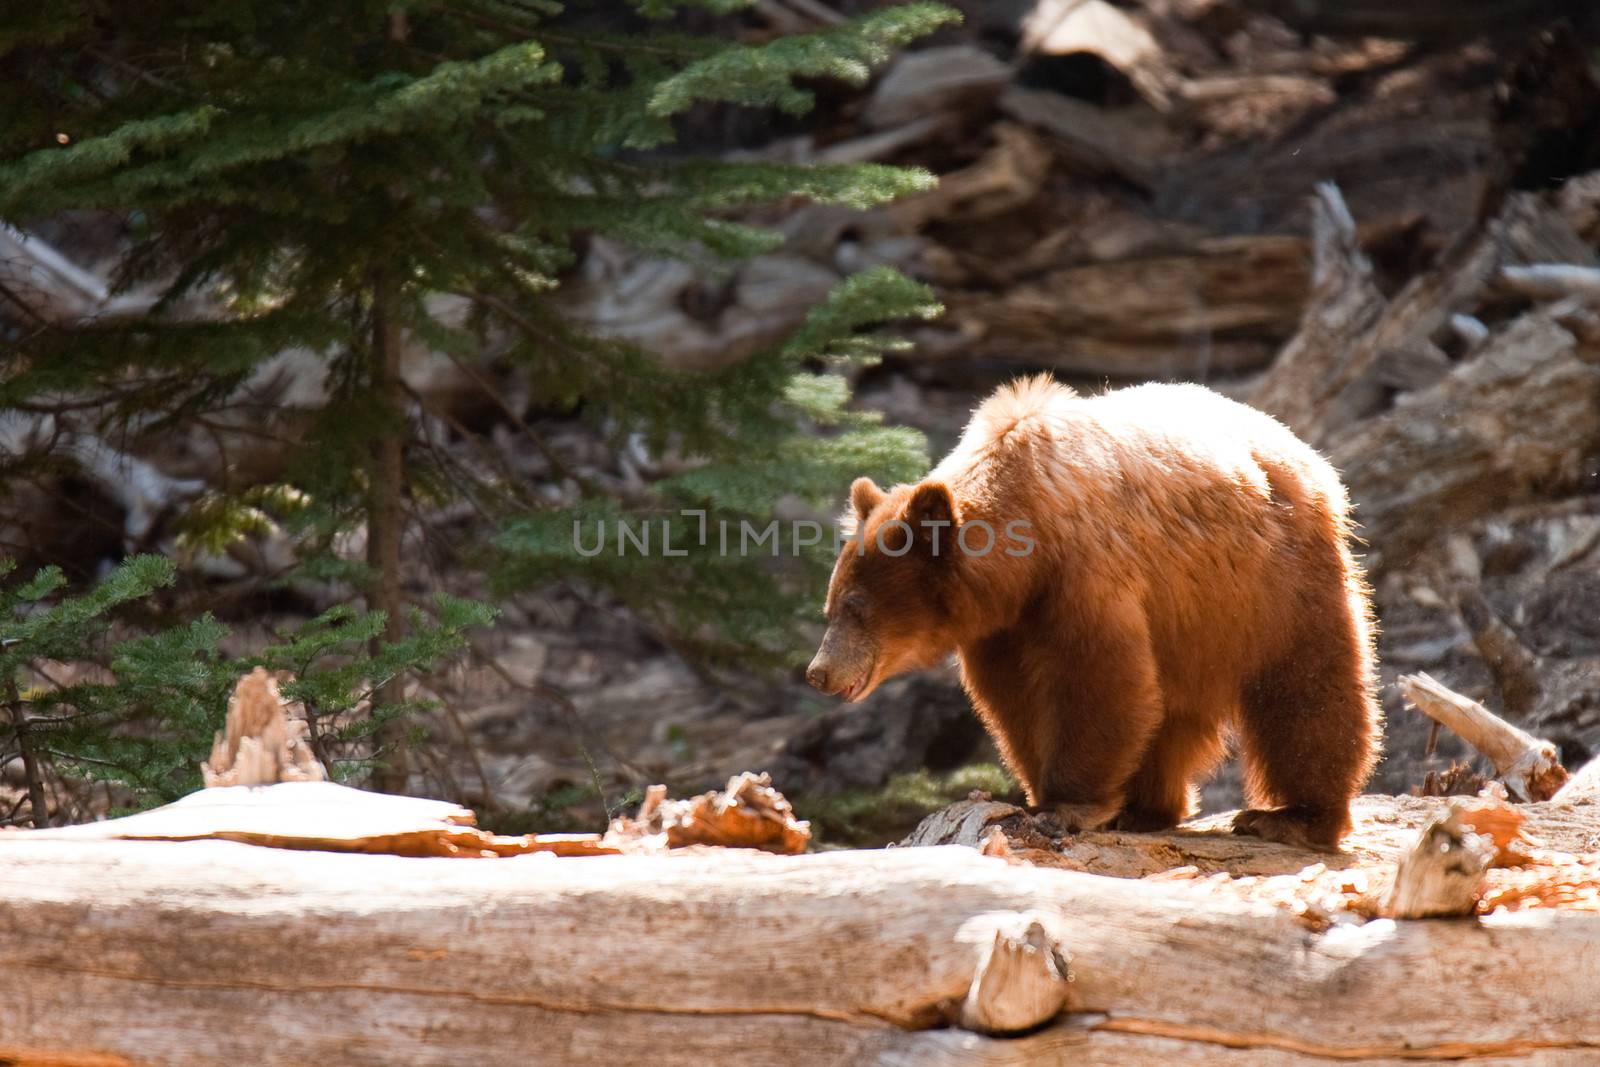 Brown bear (Ursus arctos) in a forest by CelsoDiniz